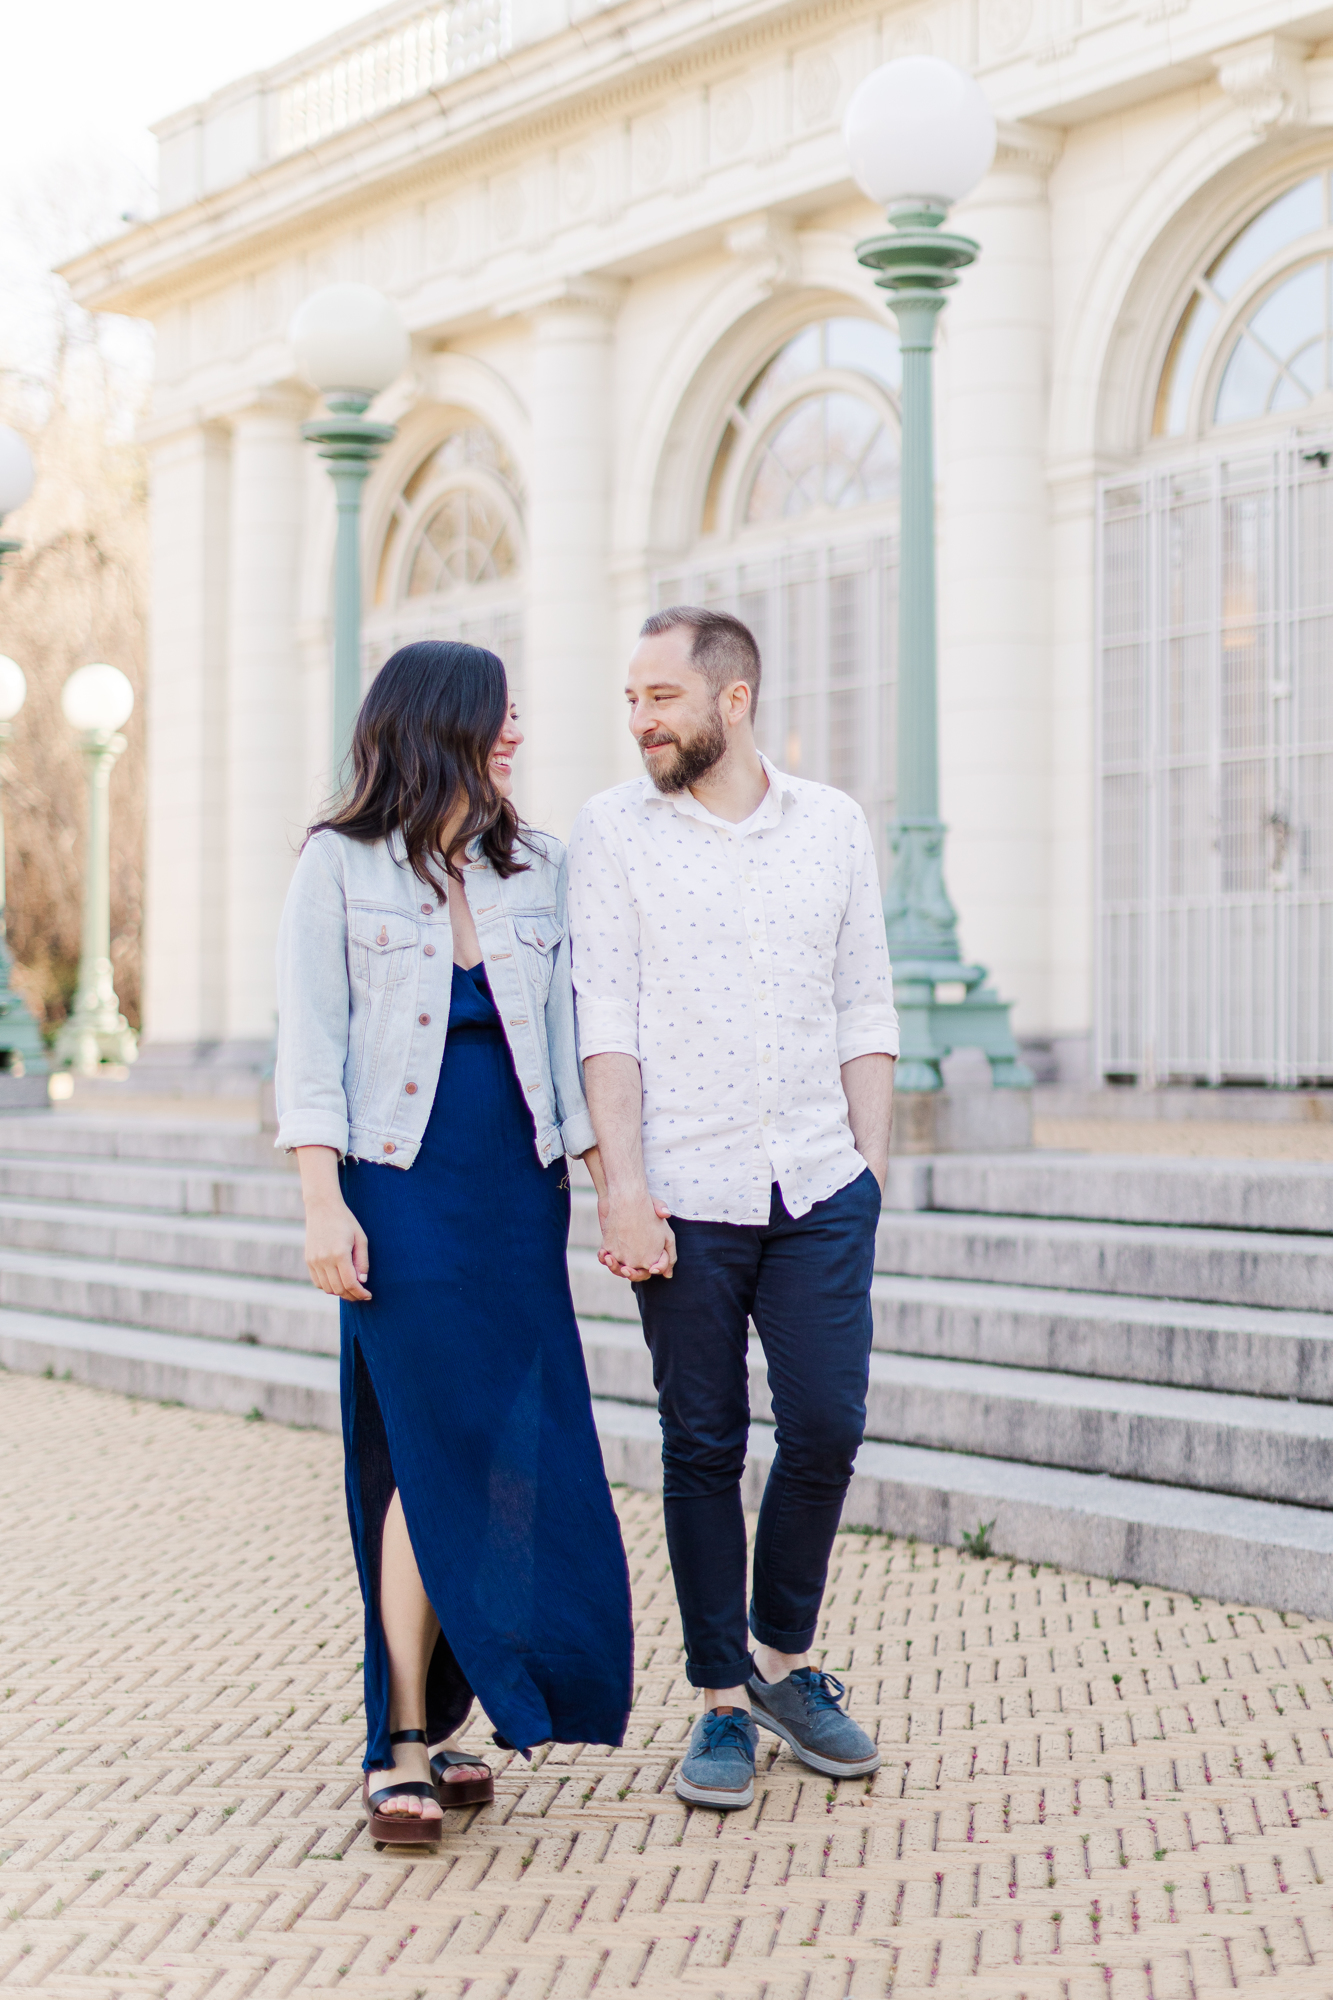 Awesome Prospect Park Engagement Session